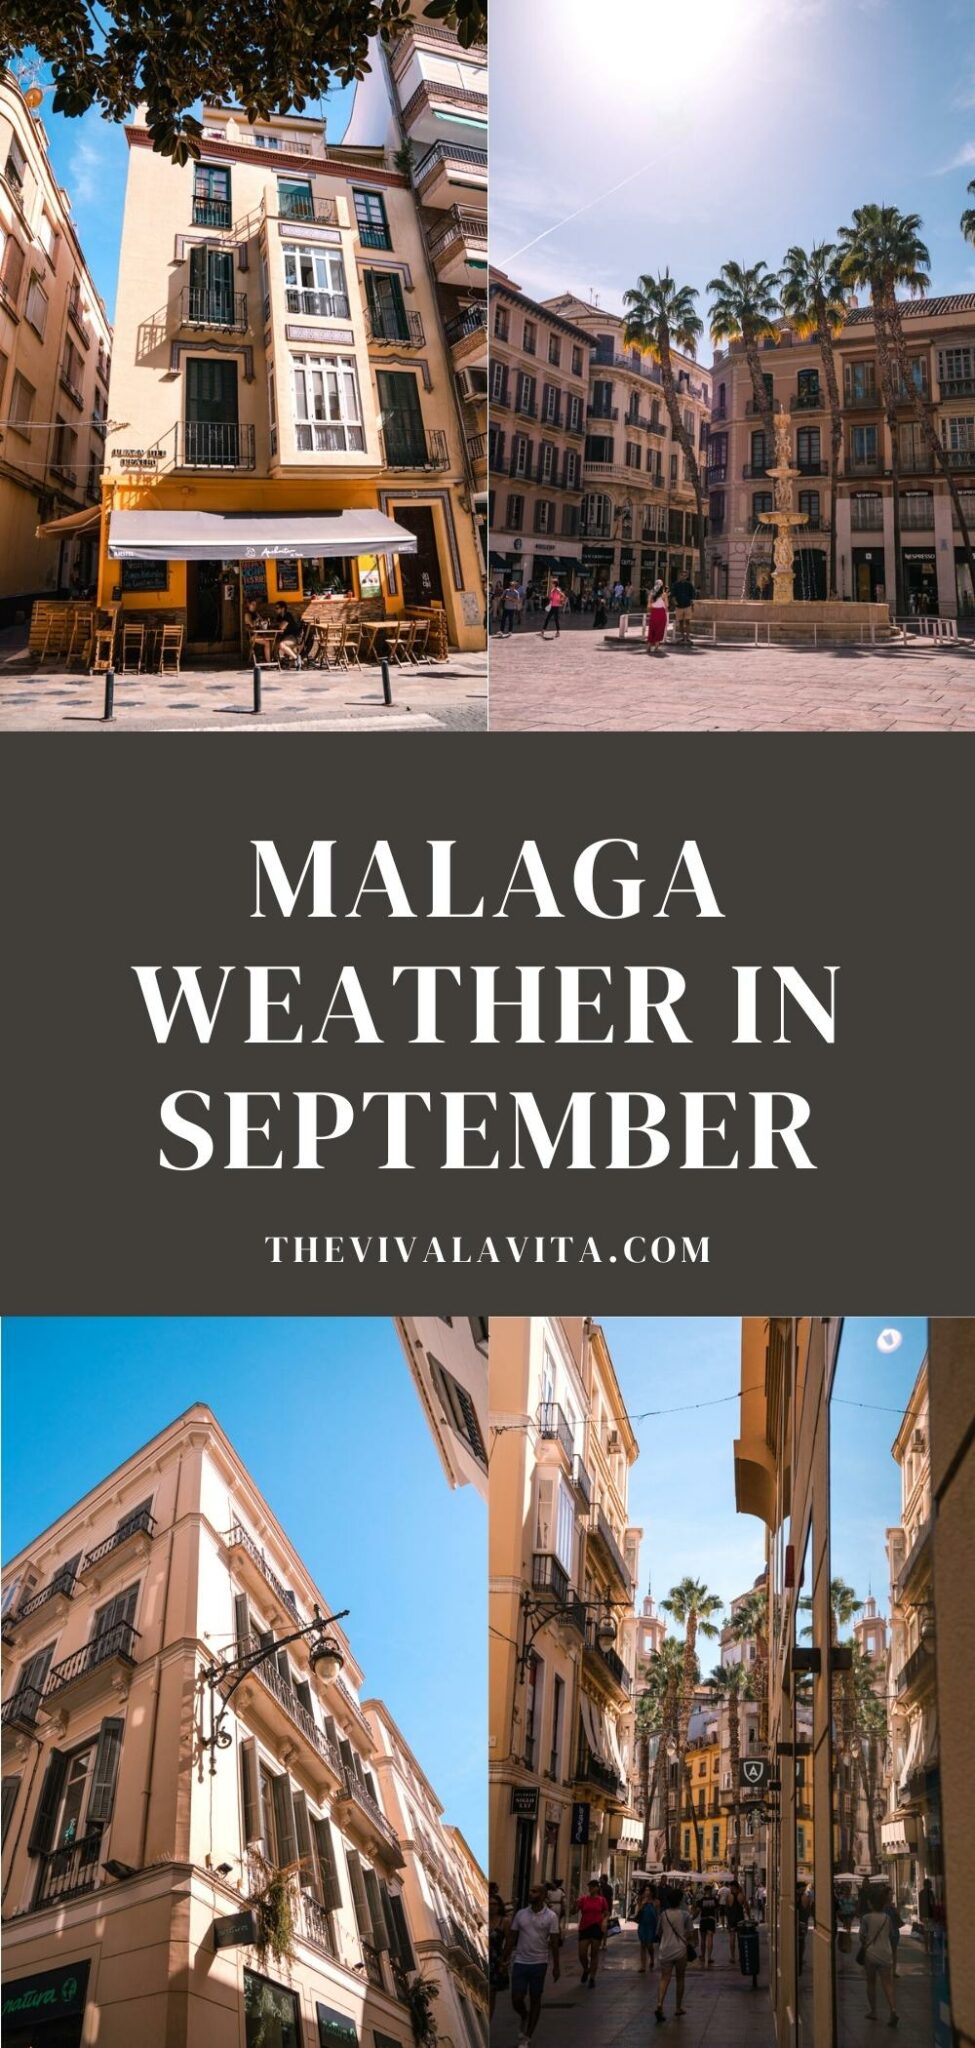 Malaga weather in September